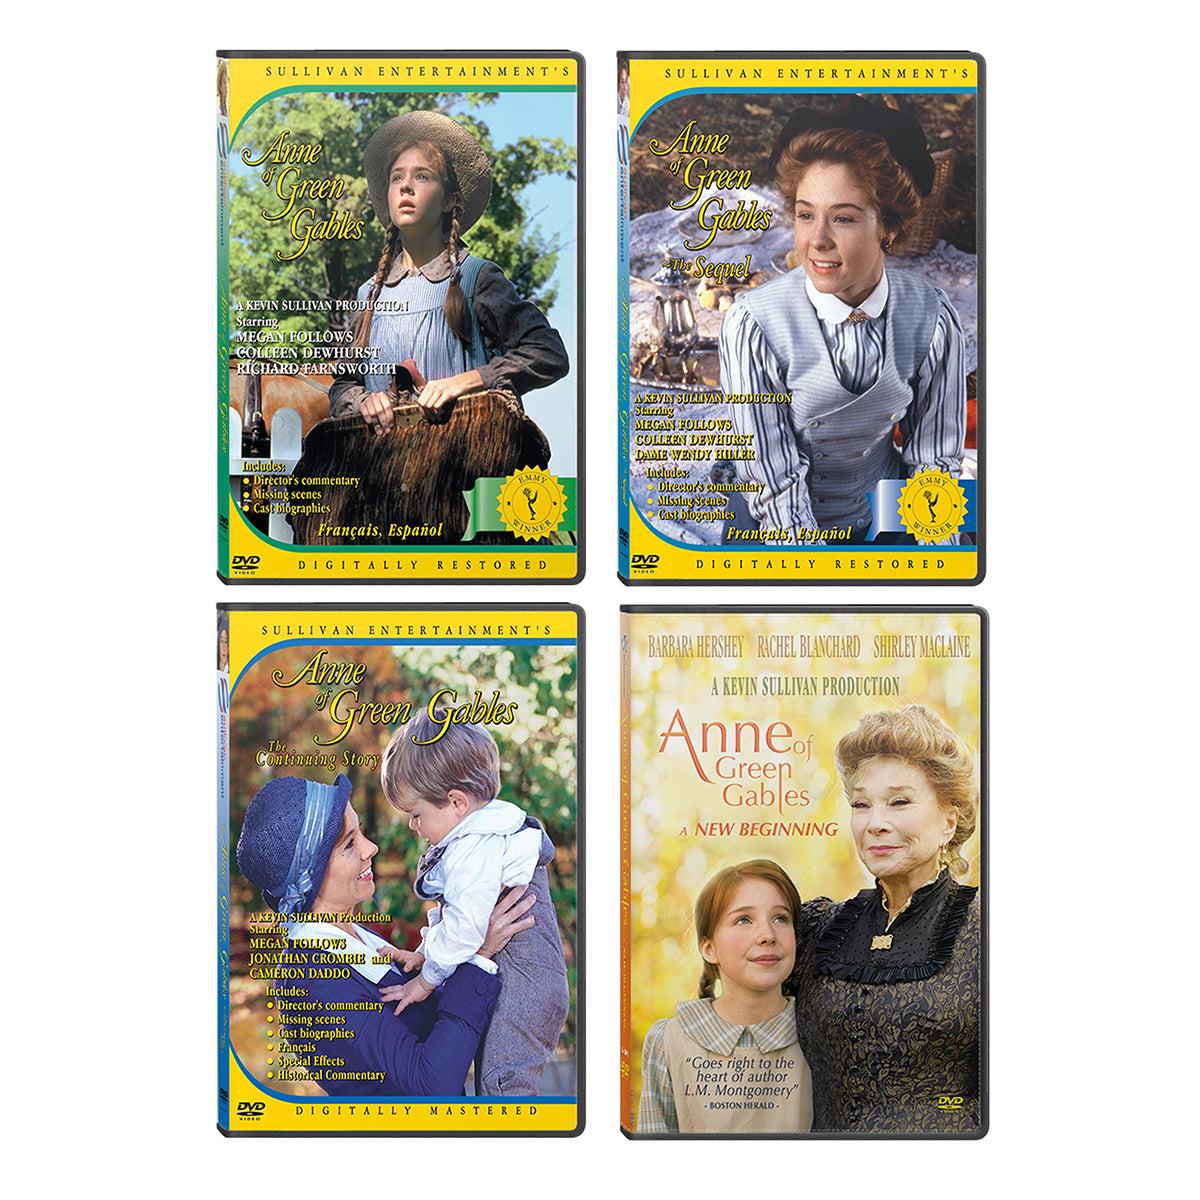 Anne: The Complete Four-Part DVD Collection (Best Value)